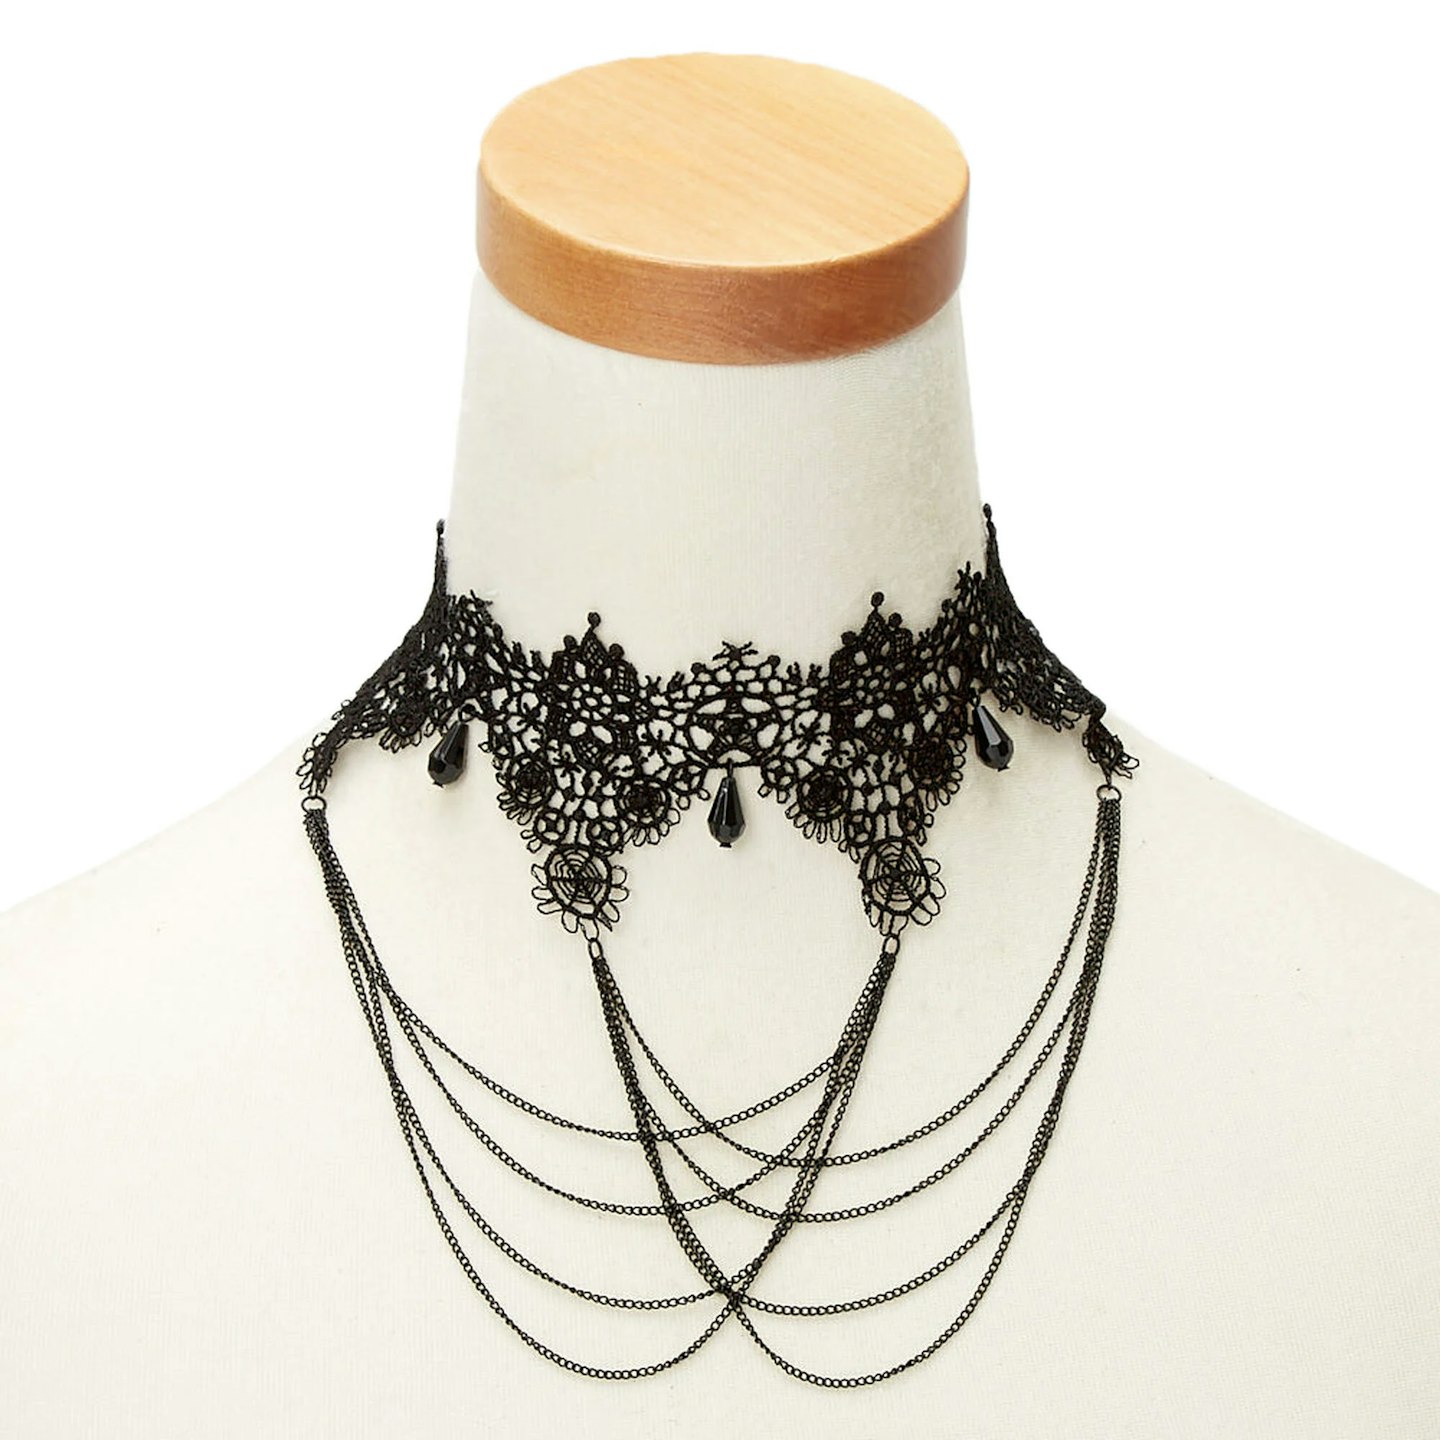 Claires Lace Swag Choker Necklace